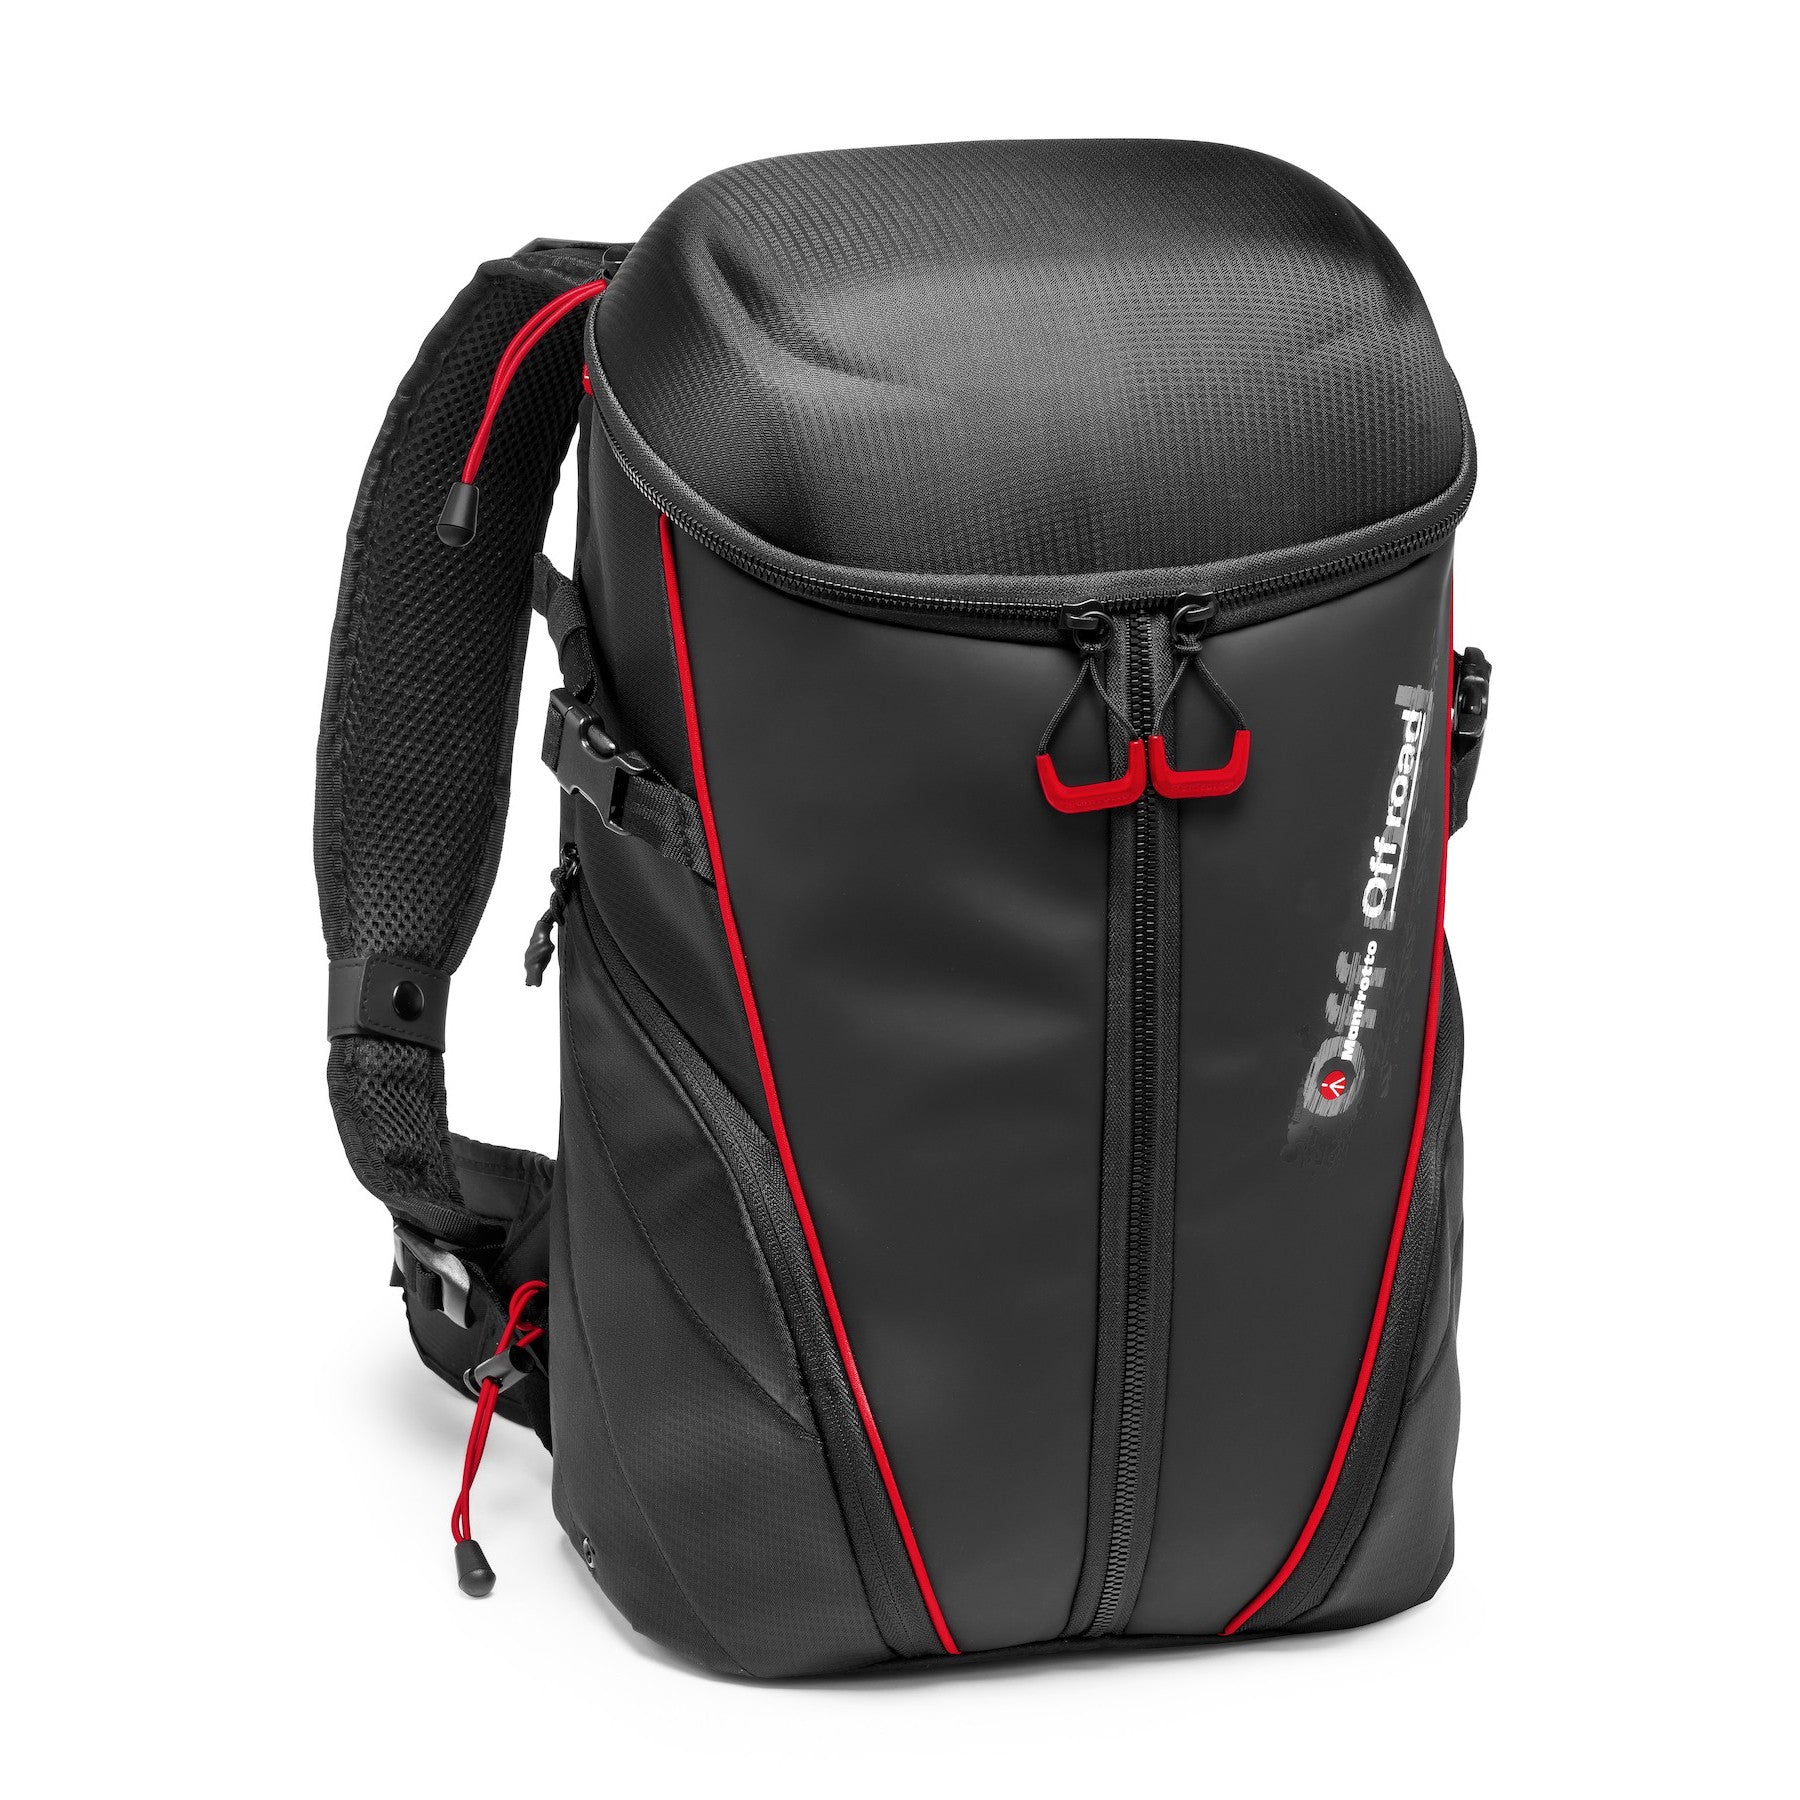 Manfrotto Off Road Stunt Backpack (Black), bags backpacks, Manfrotto - Pictureline  - 1